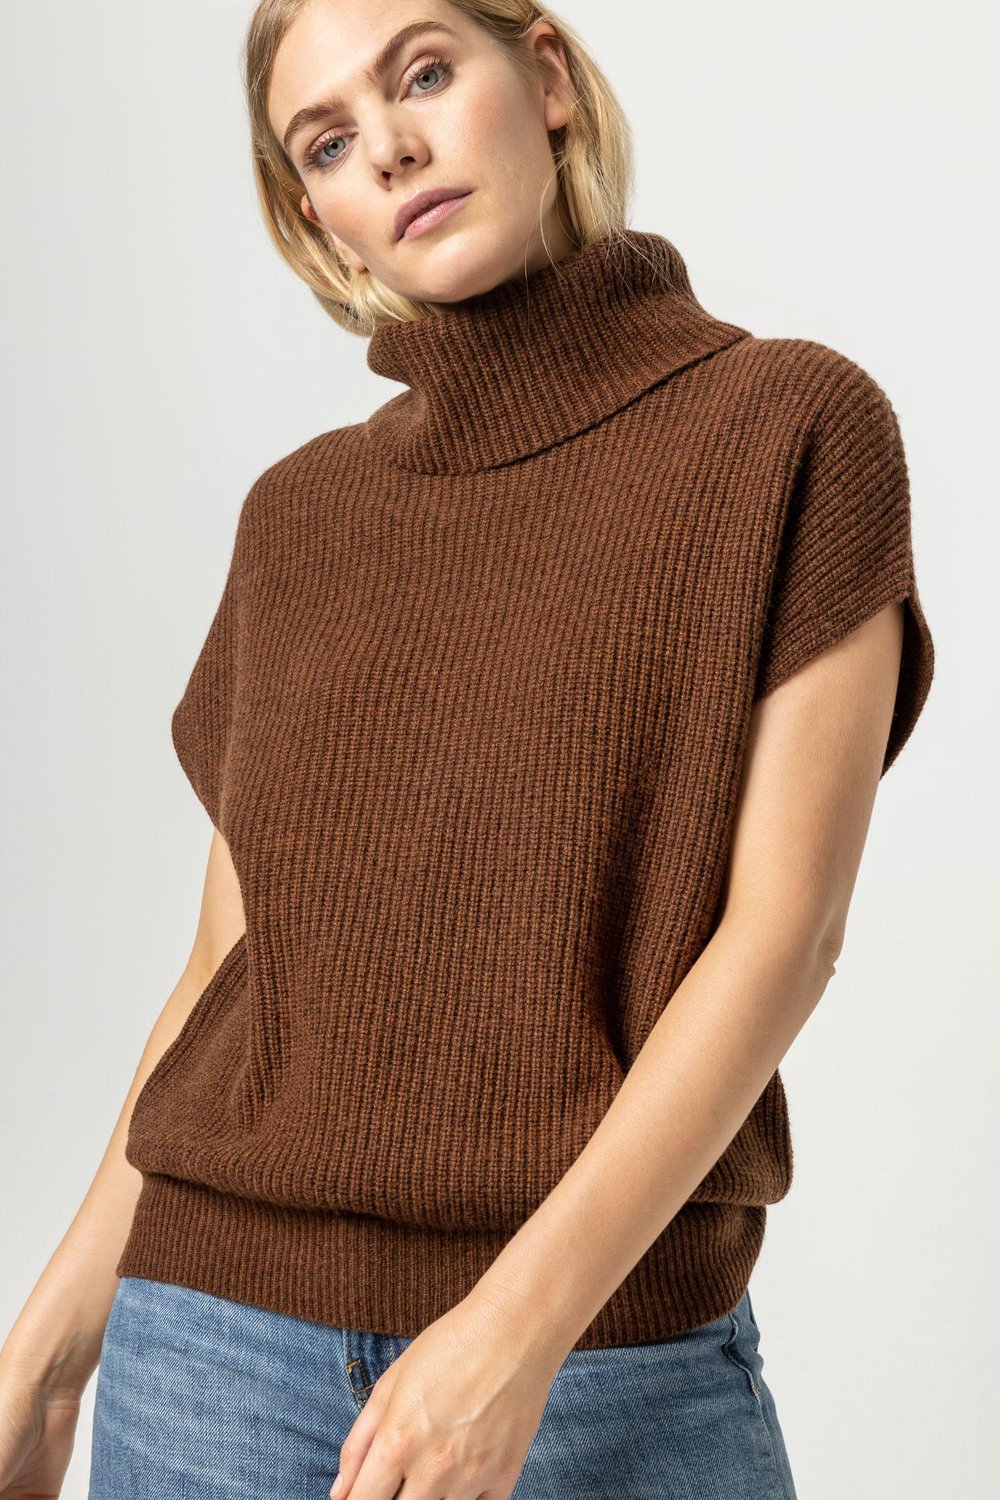 Our Famous Cashmere Ribbed Turtleneck Sweater